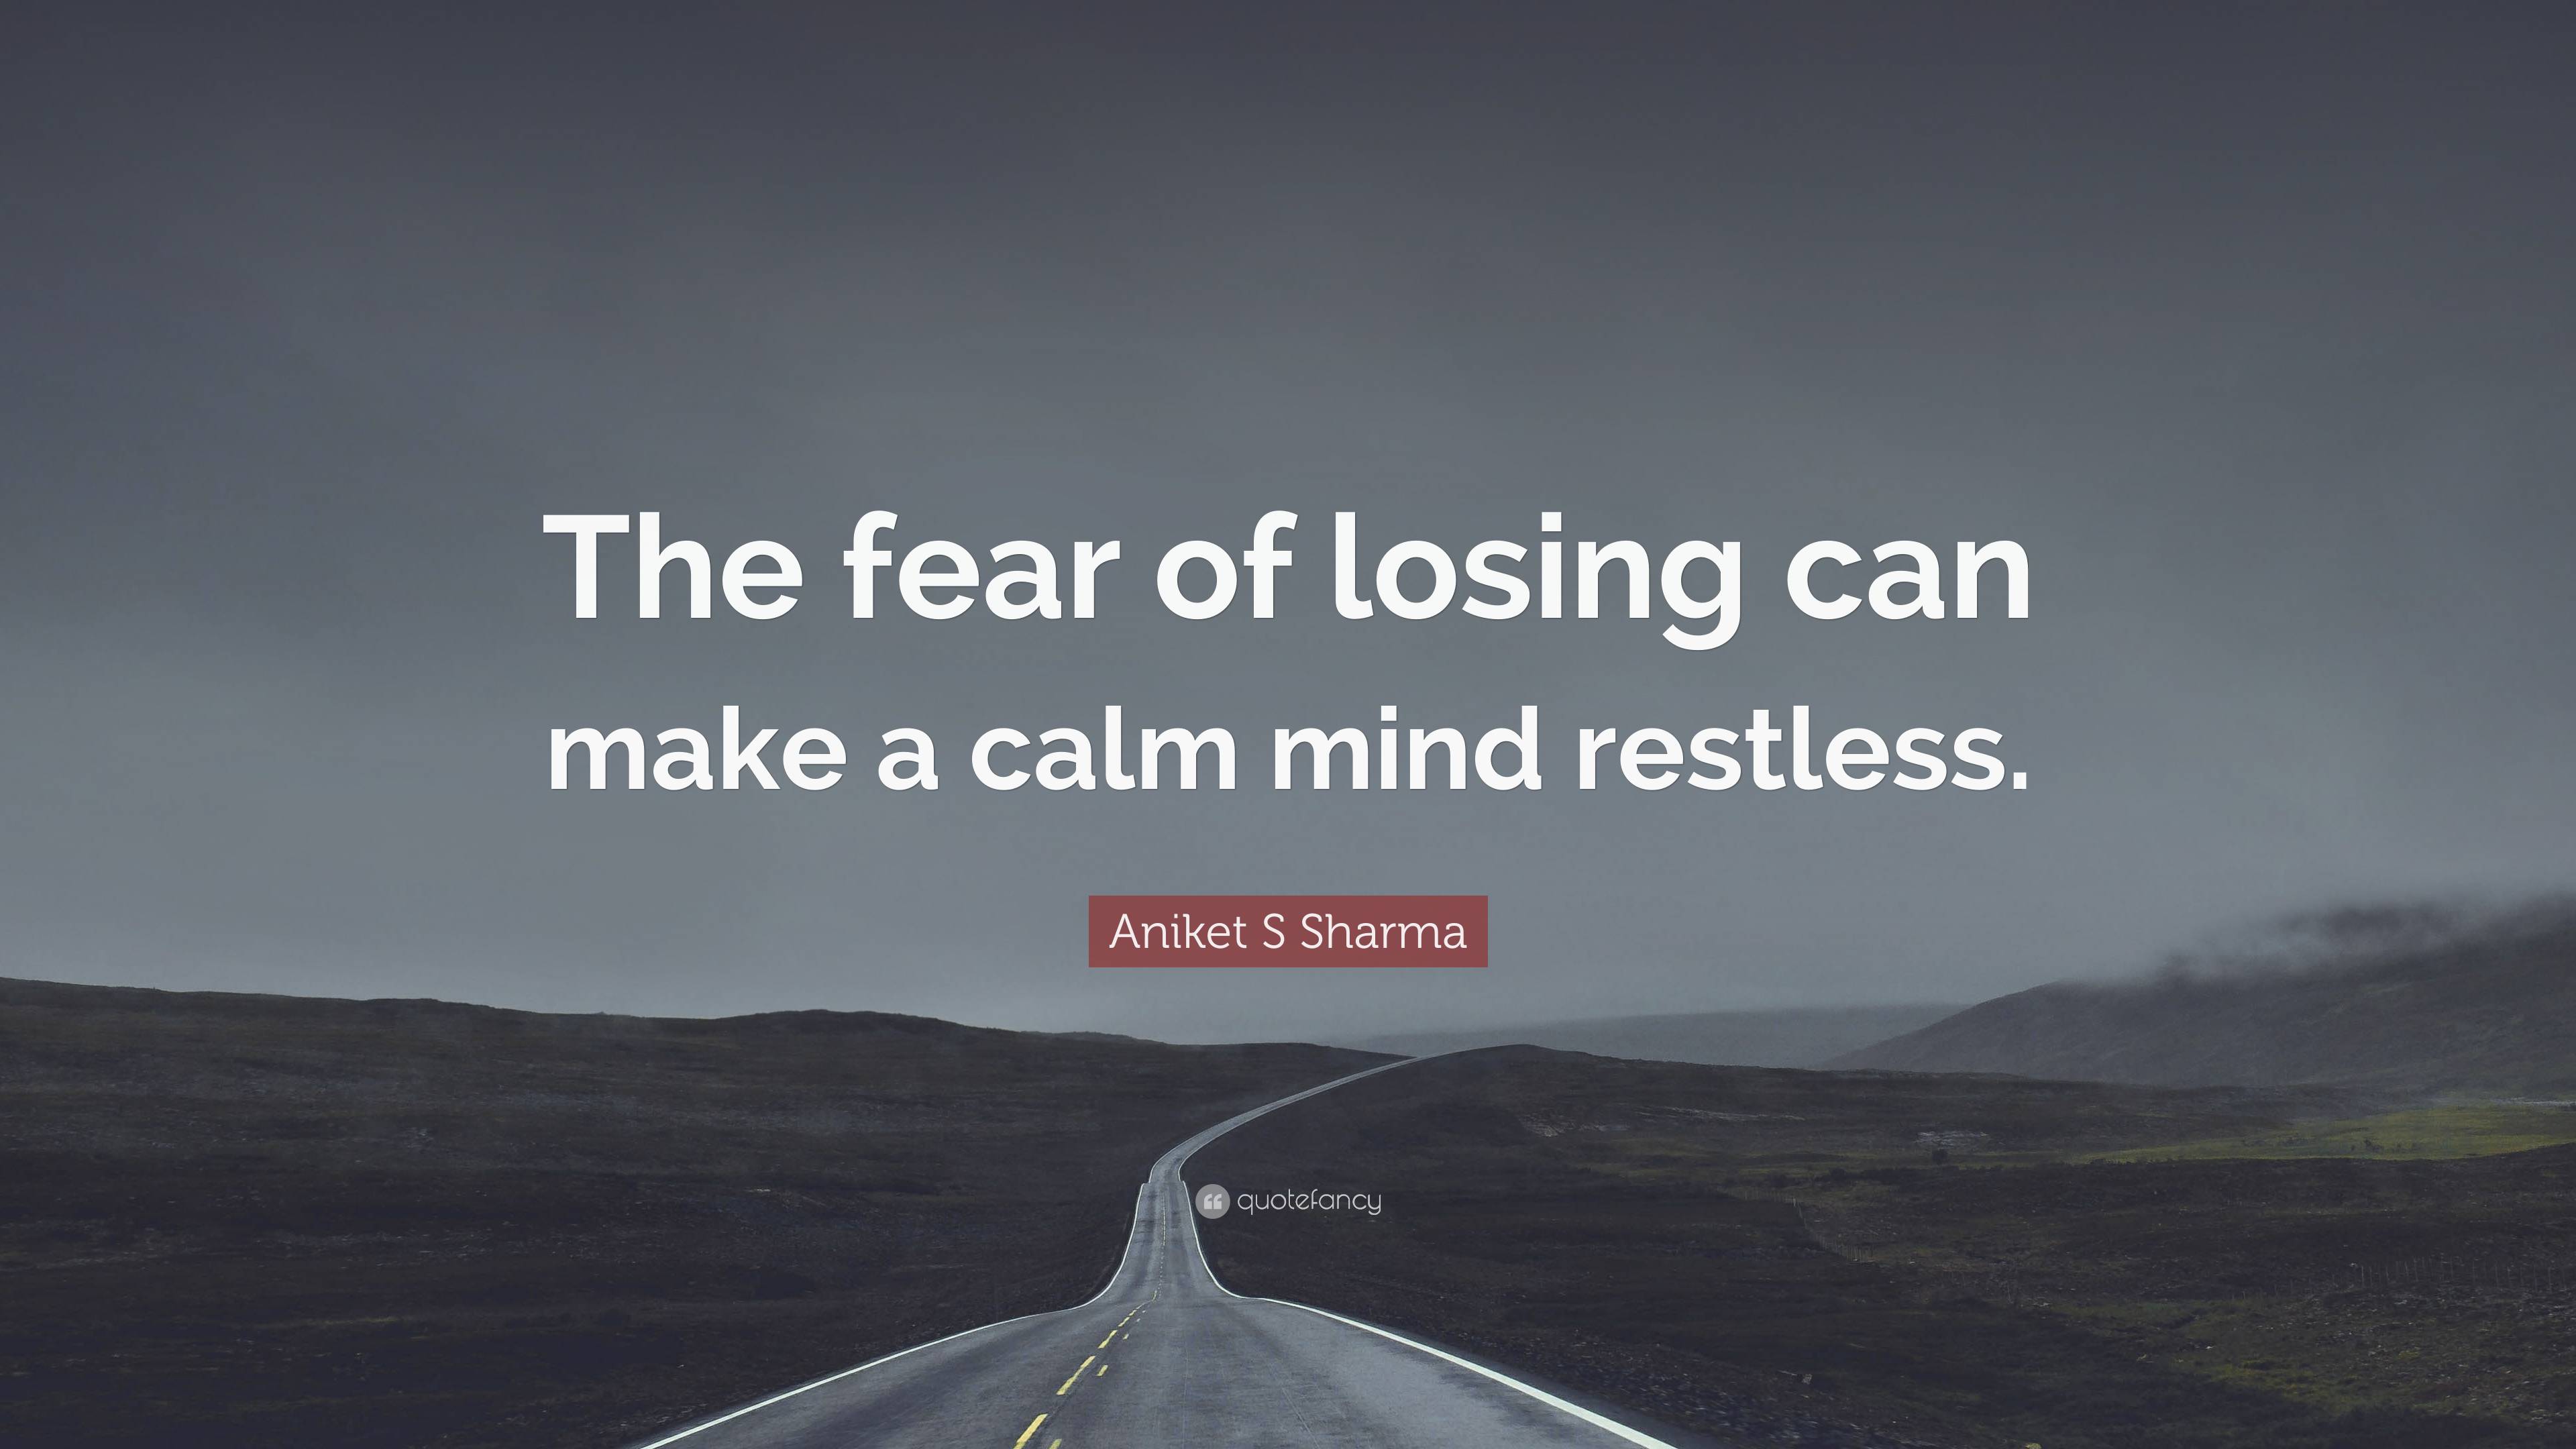 Aniket S Sharma Quote: “The fear of losing can make a calm mind restless.”